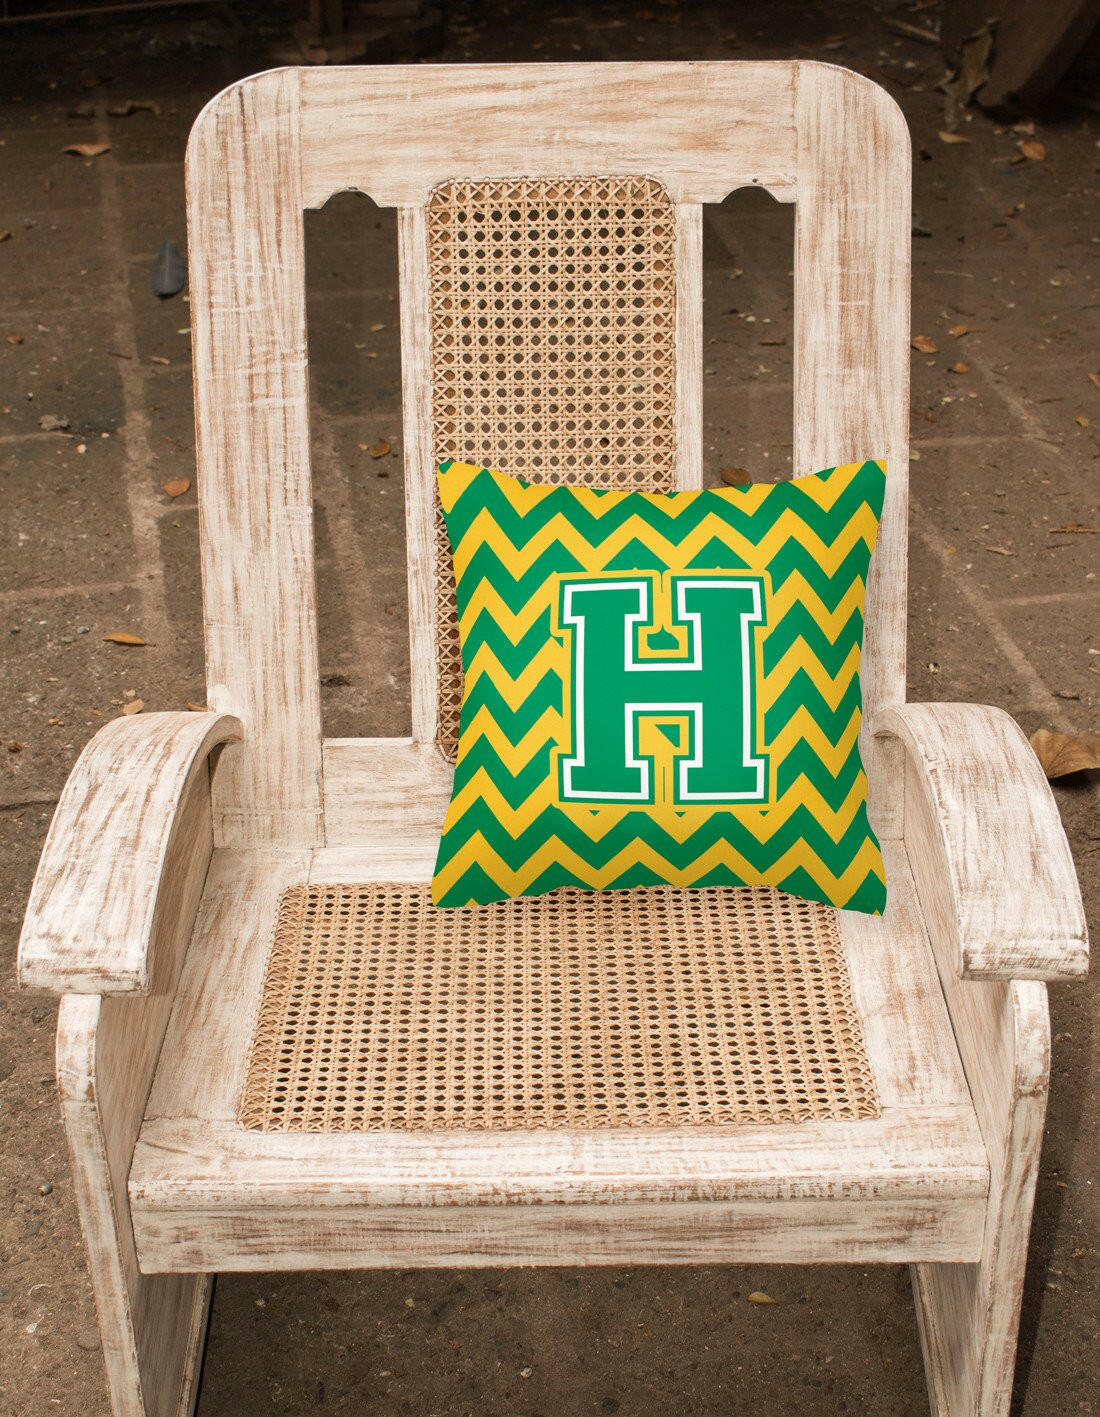 Letter H Chevron Green and Gold Fabric Decorative Pillow CJ1059-HPW1414 by Caroline's Treasures